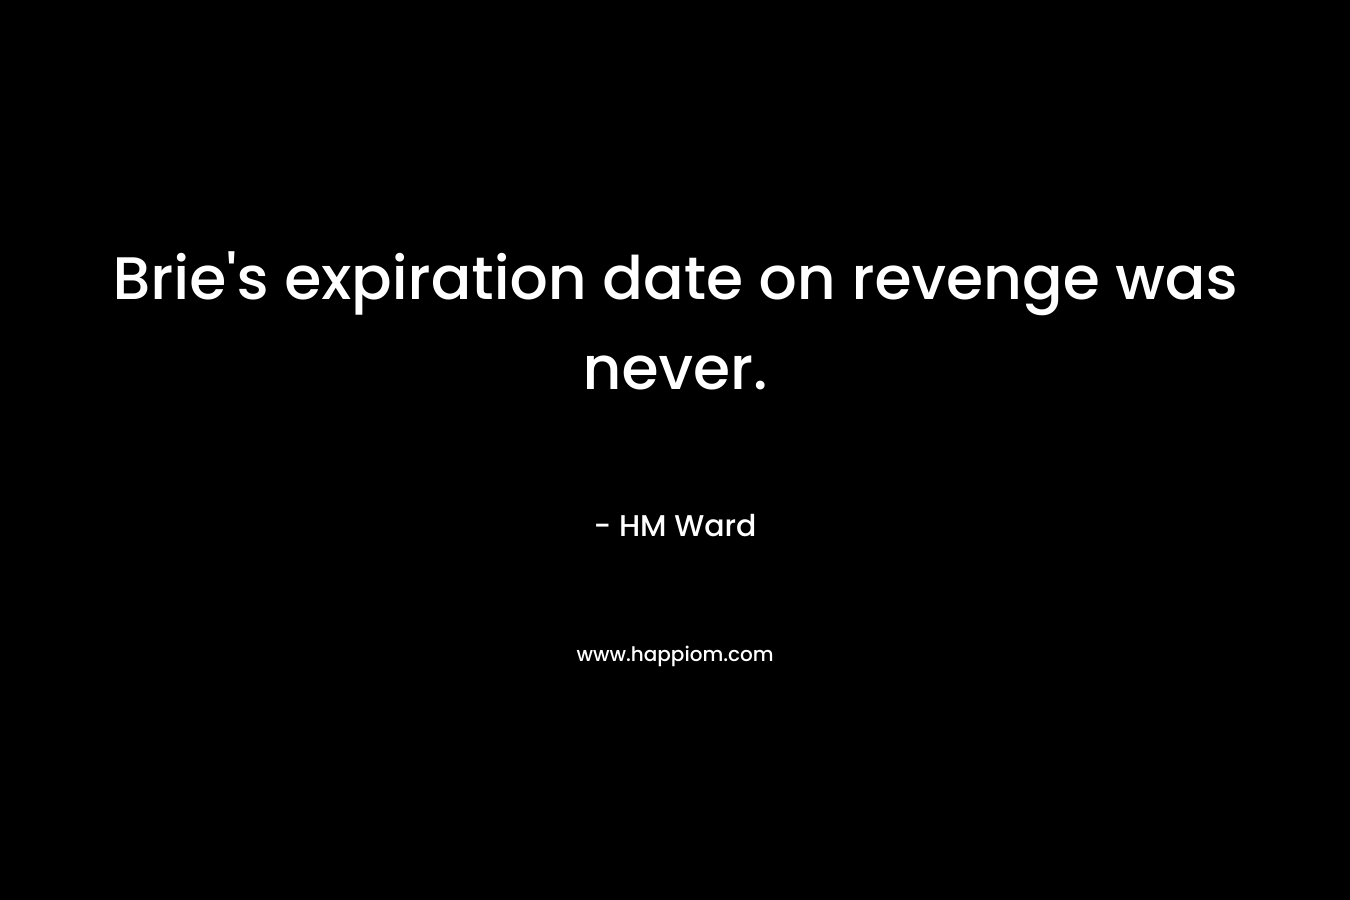 Brie's expiration date on revenge was never.